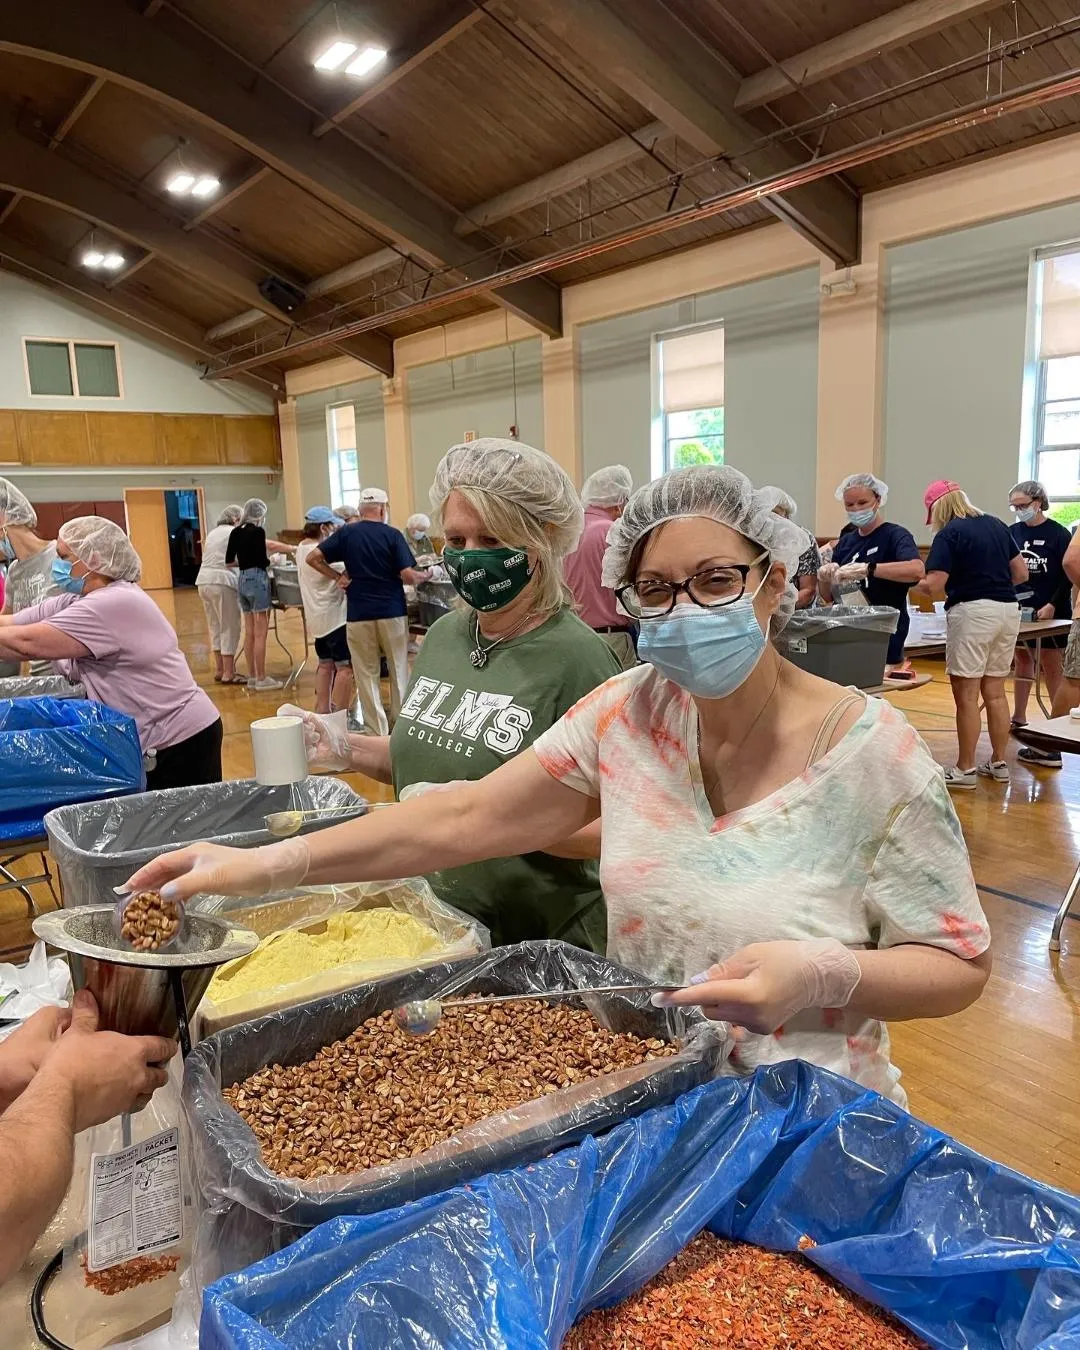 Volunteers pack meals for families in Haiti at St. Cecilia parish in Wilbraham, Mass., May 2022.?w=200&h=150